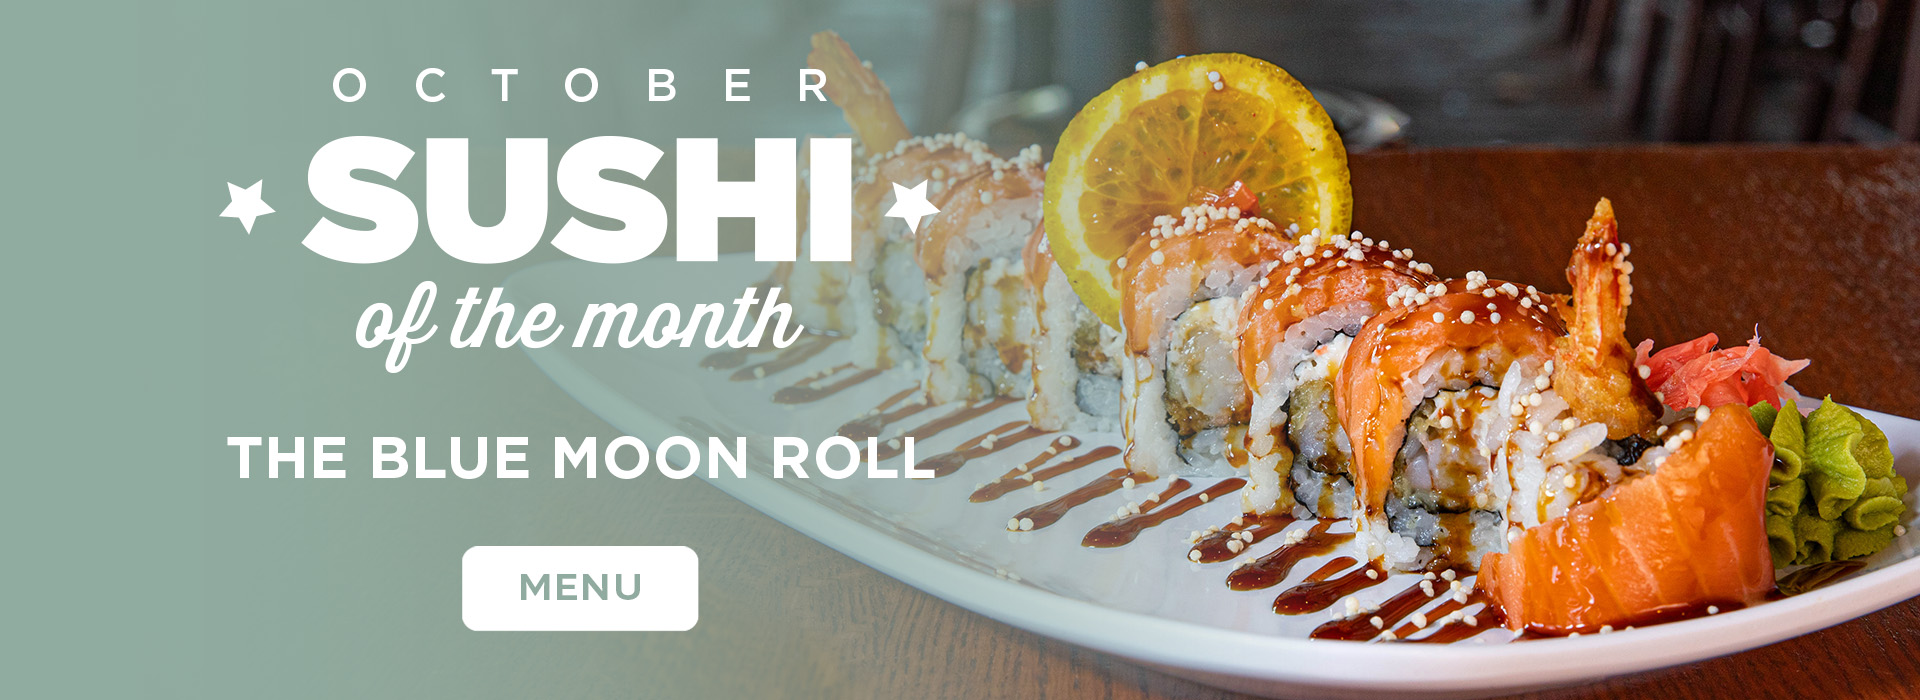 Click or tap here to view our sushi of the month, the Chili Lime Roll!